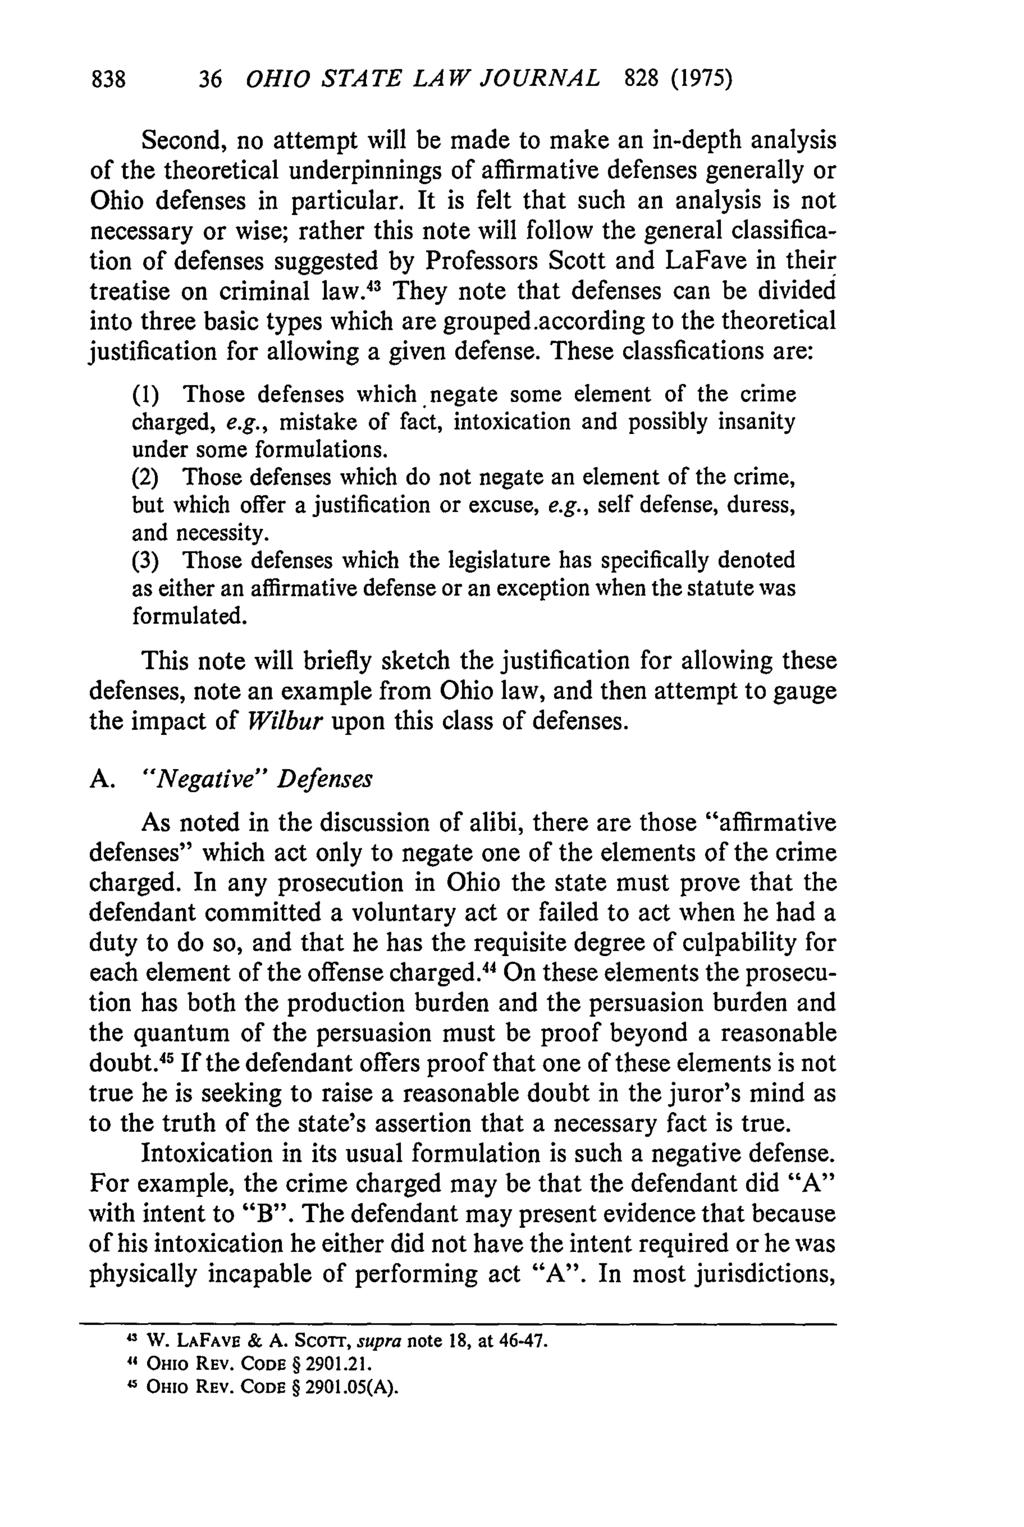 36 OHIO STATE LAW JOURNAL 828 (1975) Second, no attempt will be made to make an in-depth analysis of the theoretical underpinnings of affirmative defenses generally or Ohio defenses in particular.